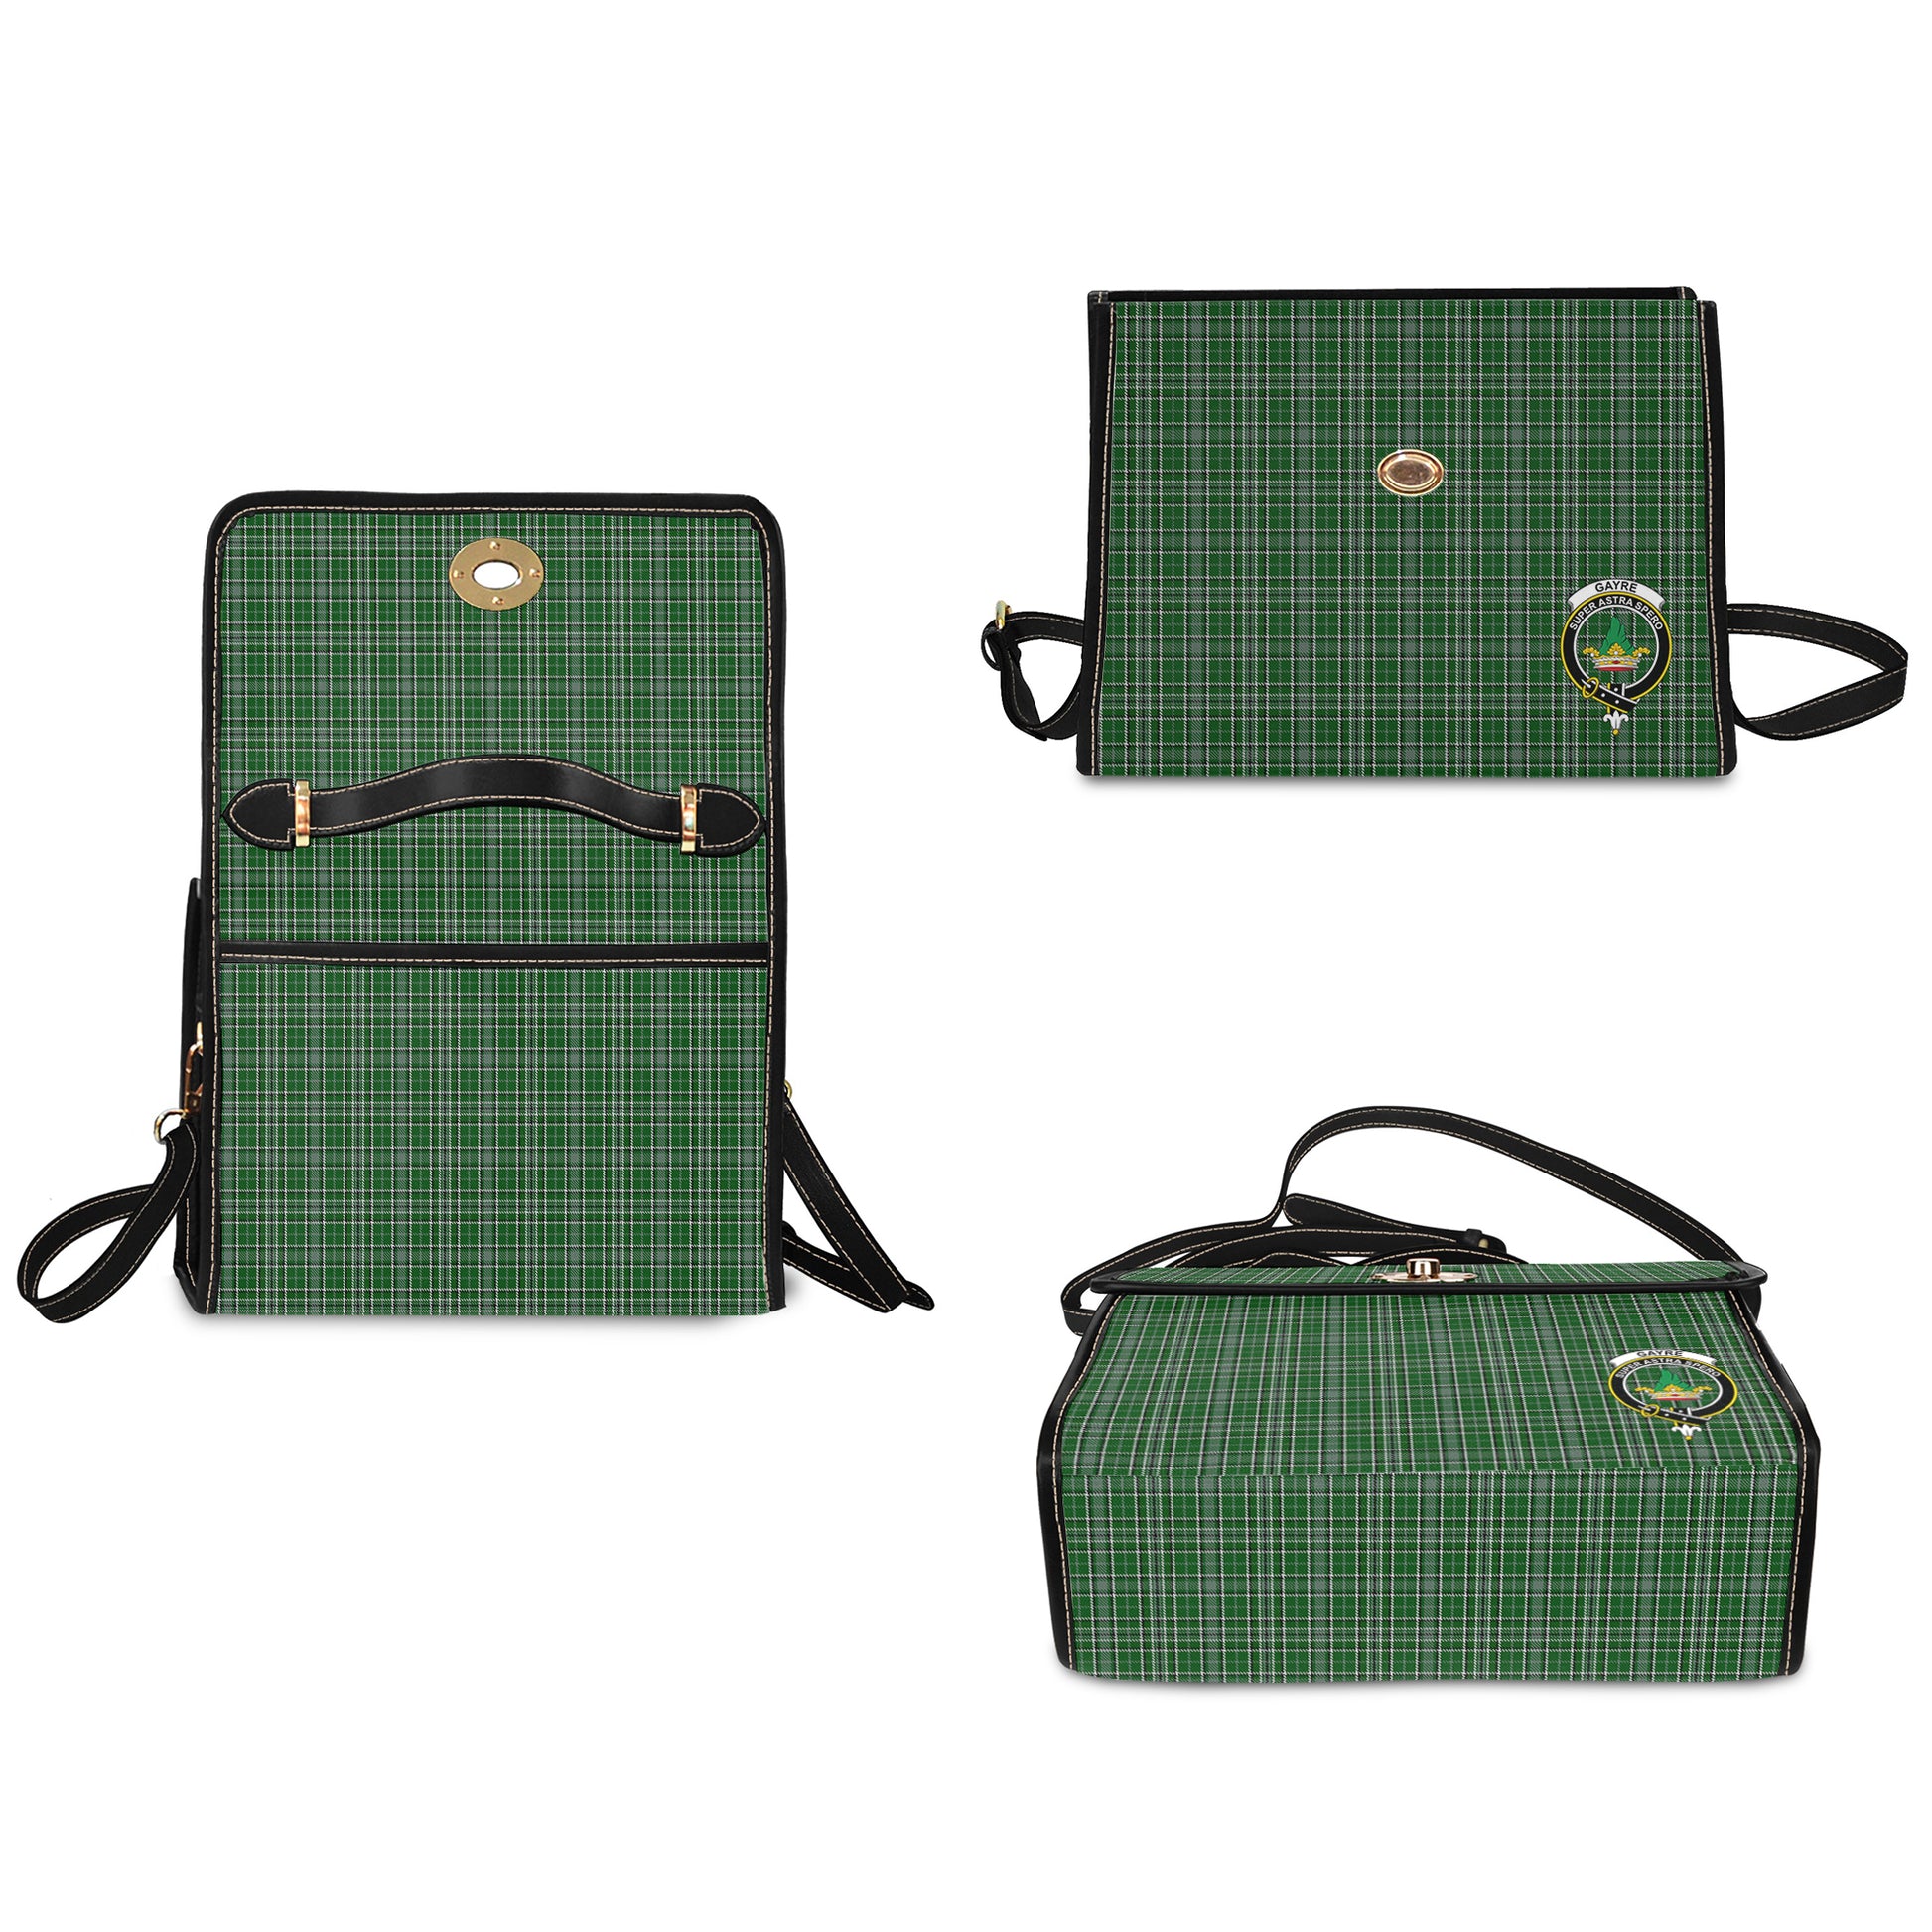 gayre-dress-tartan-leather-strap-waterproof-canvas-bag-with-family-crest